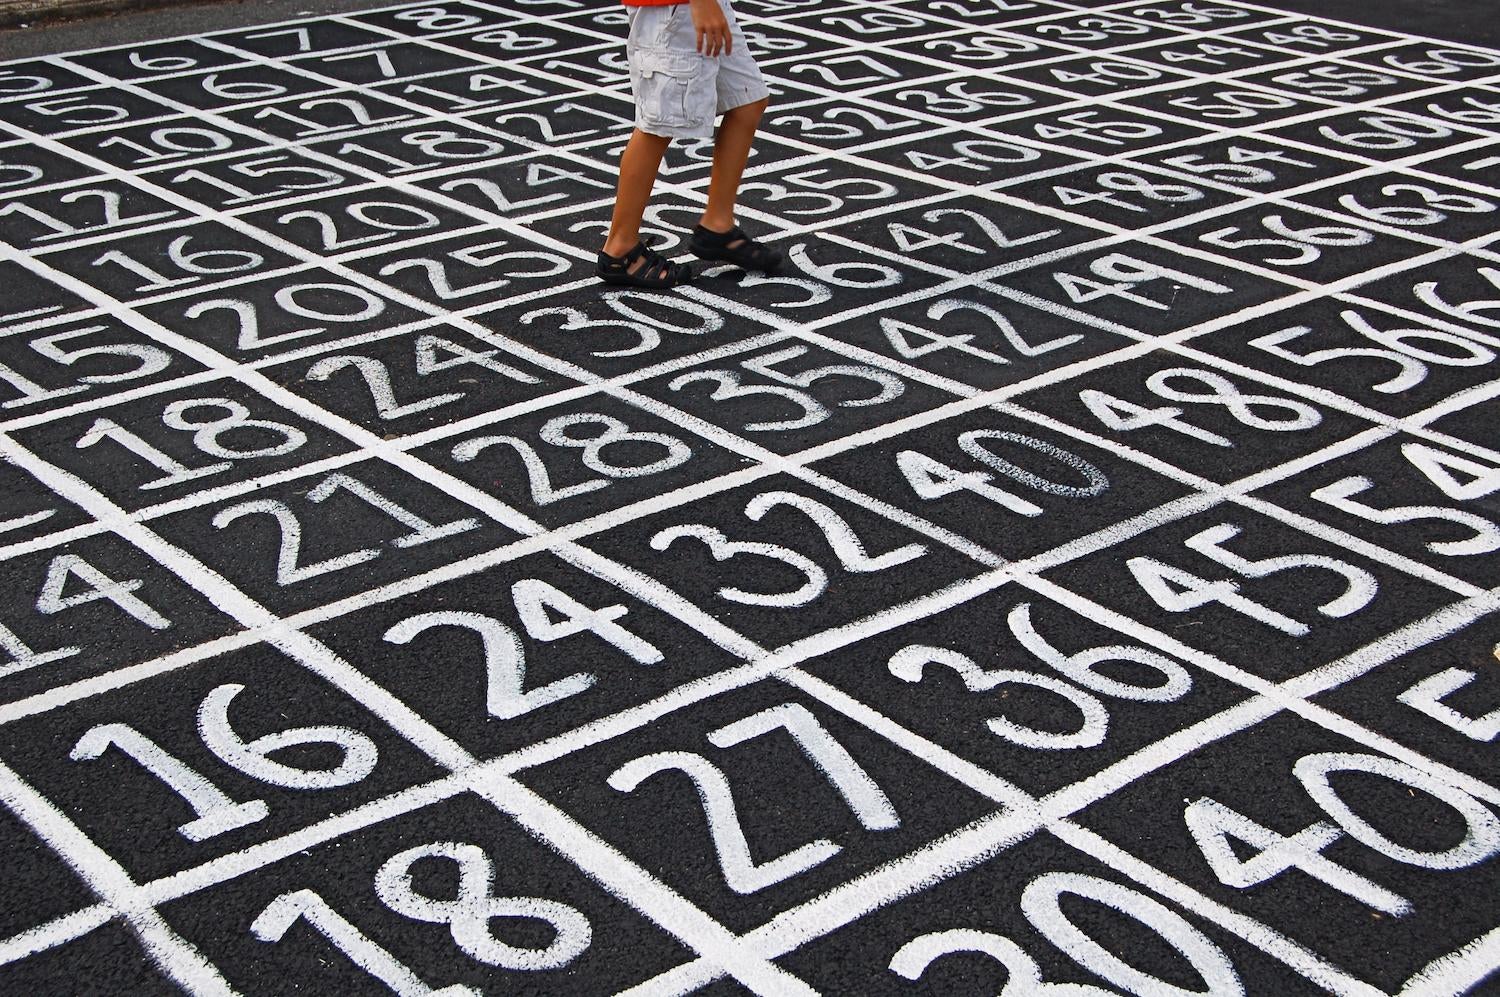 numbers pained on a street